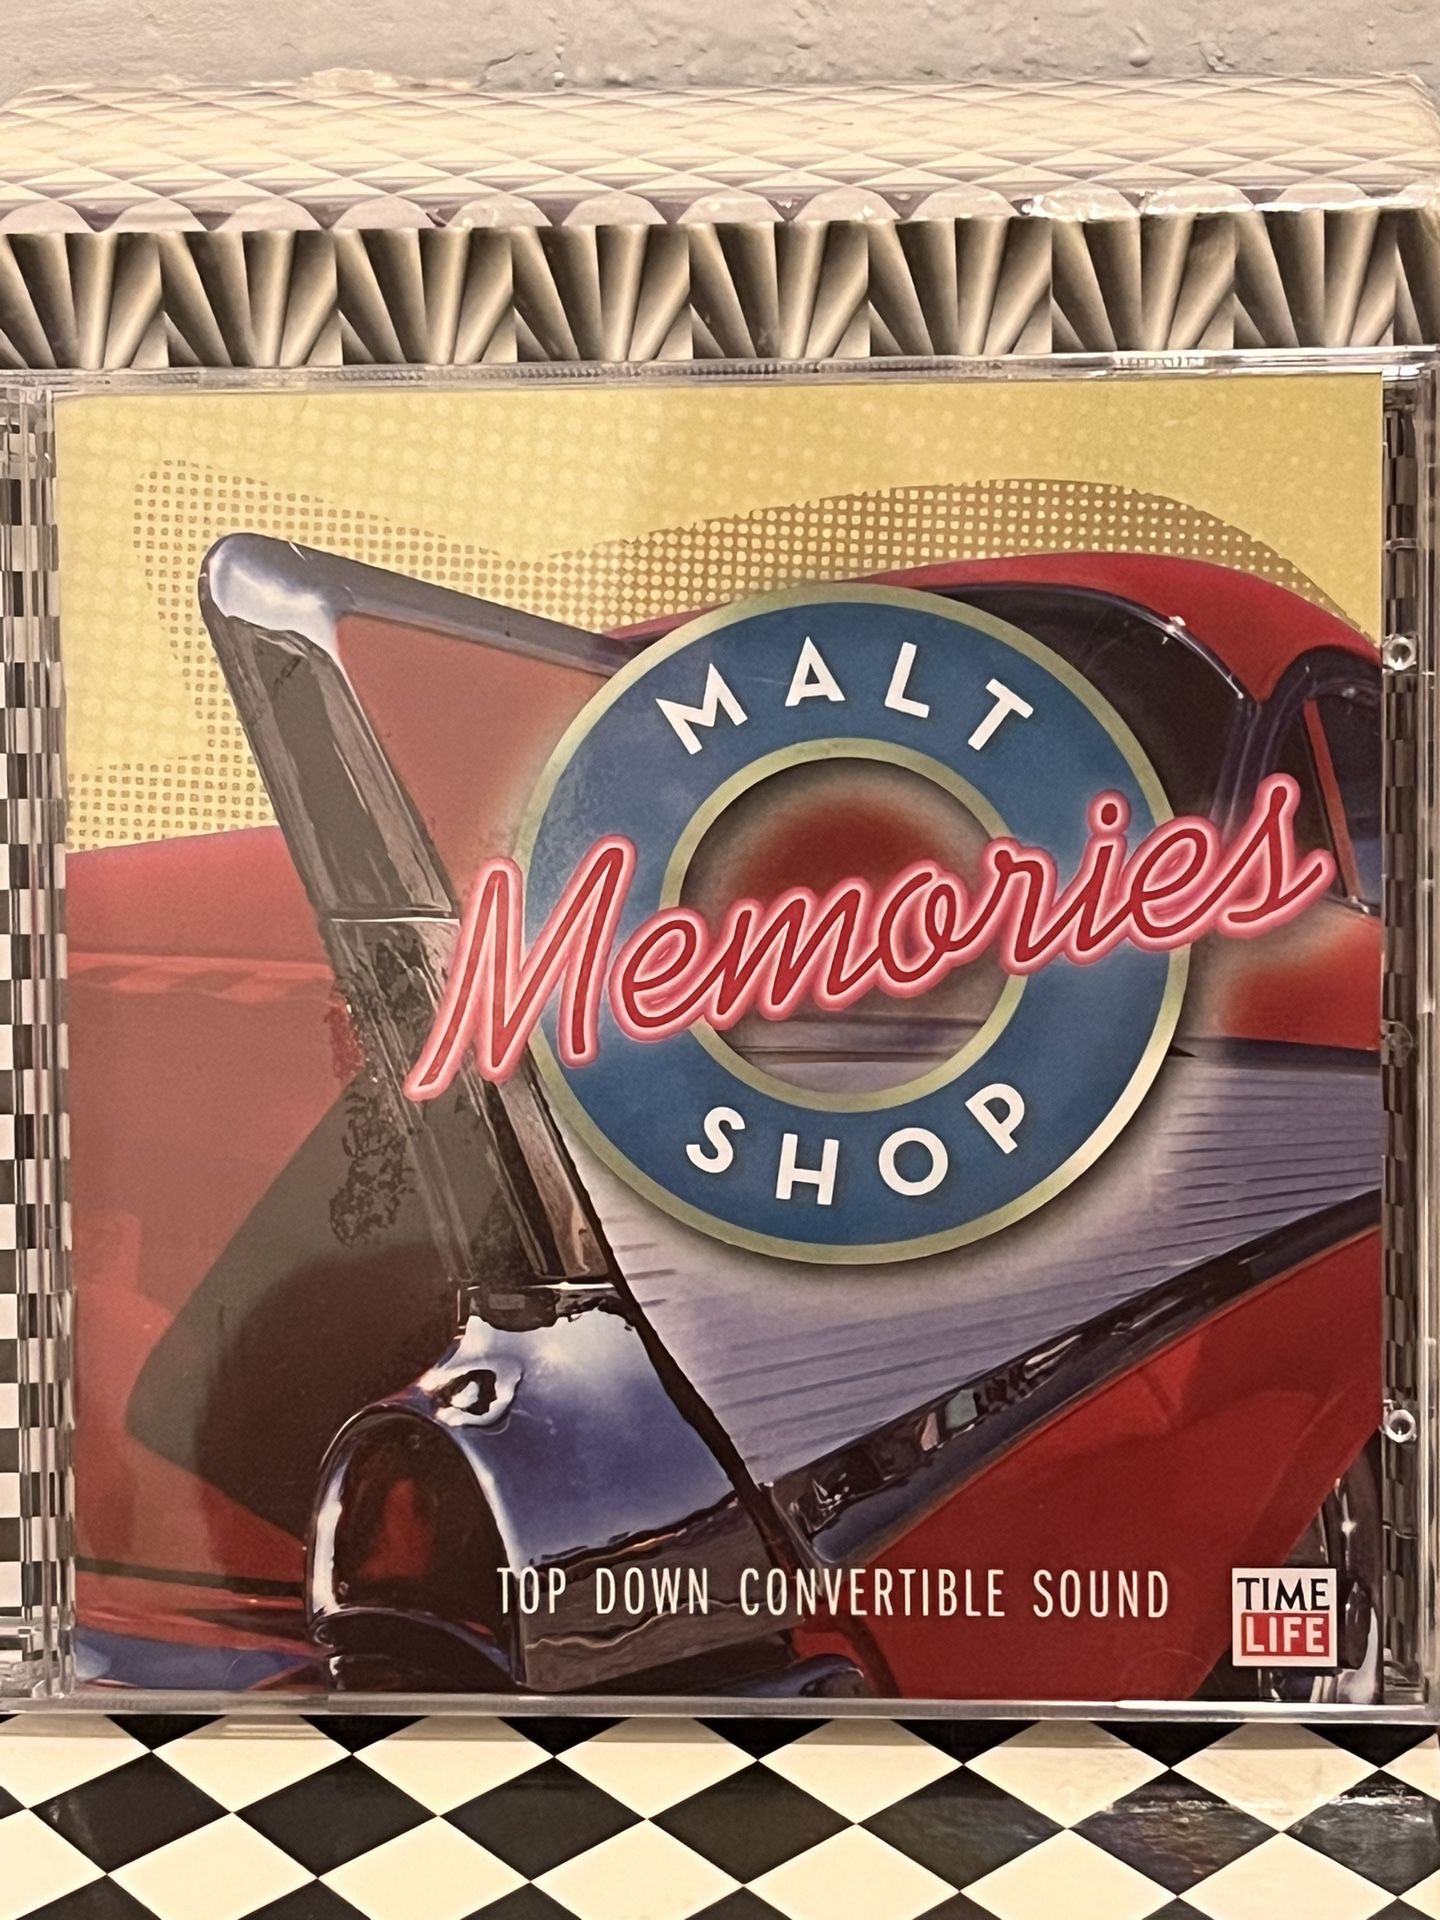 New Sealed Double CD Malt Shop Memories - Top Down Convertible Sound (CD, 2006, 2 Discs, Time Life)